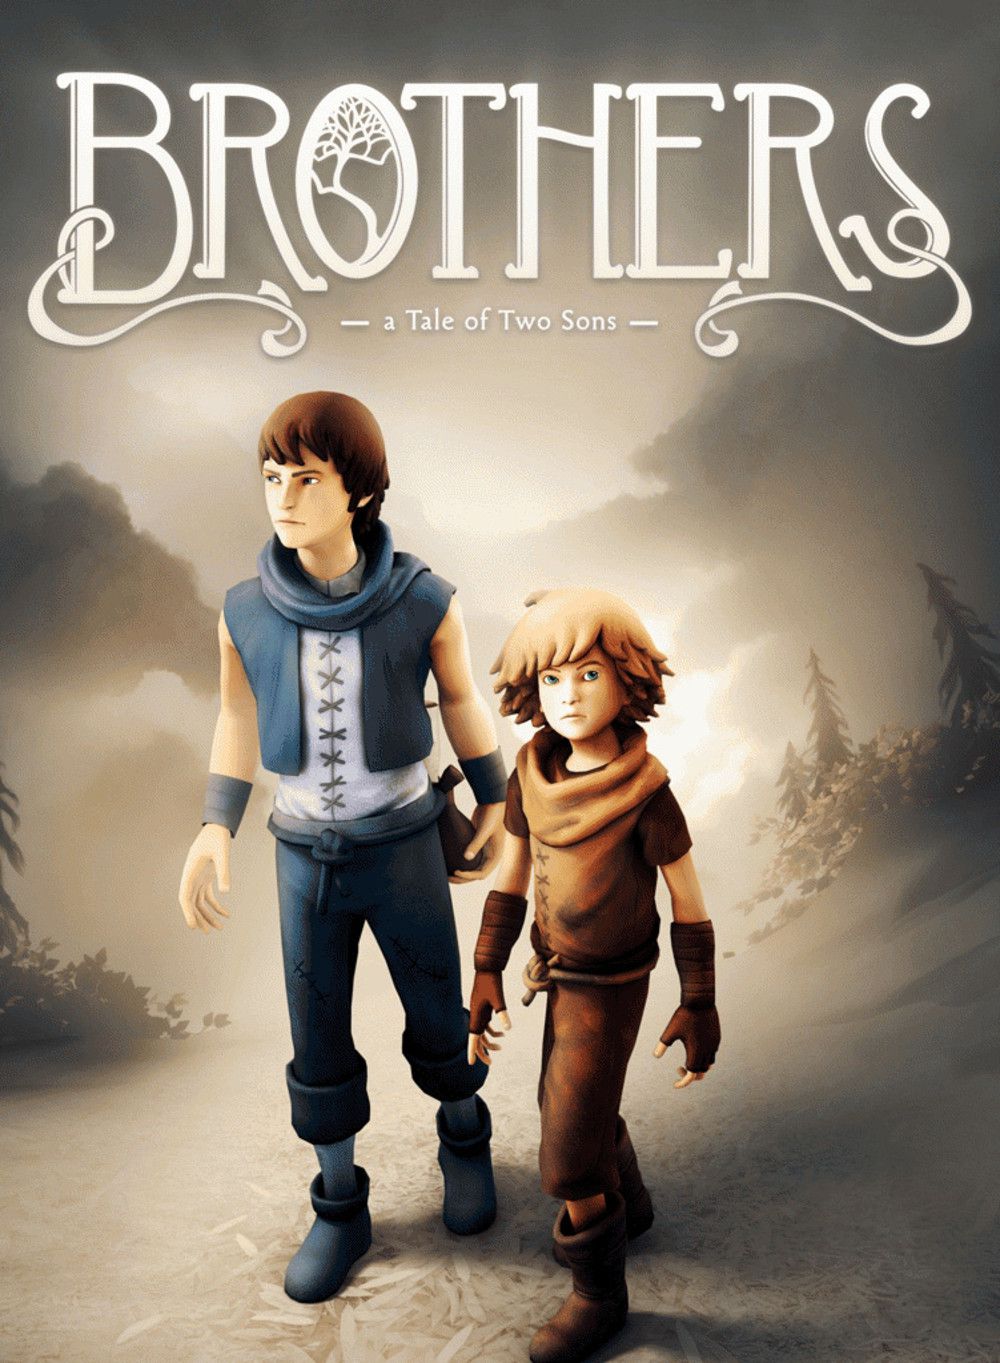 Brothers : A Tale of Two Sons (2013)  - Jeu vidéo